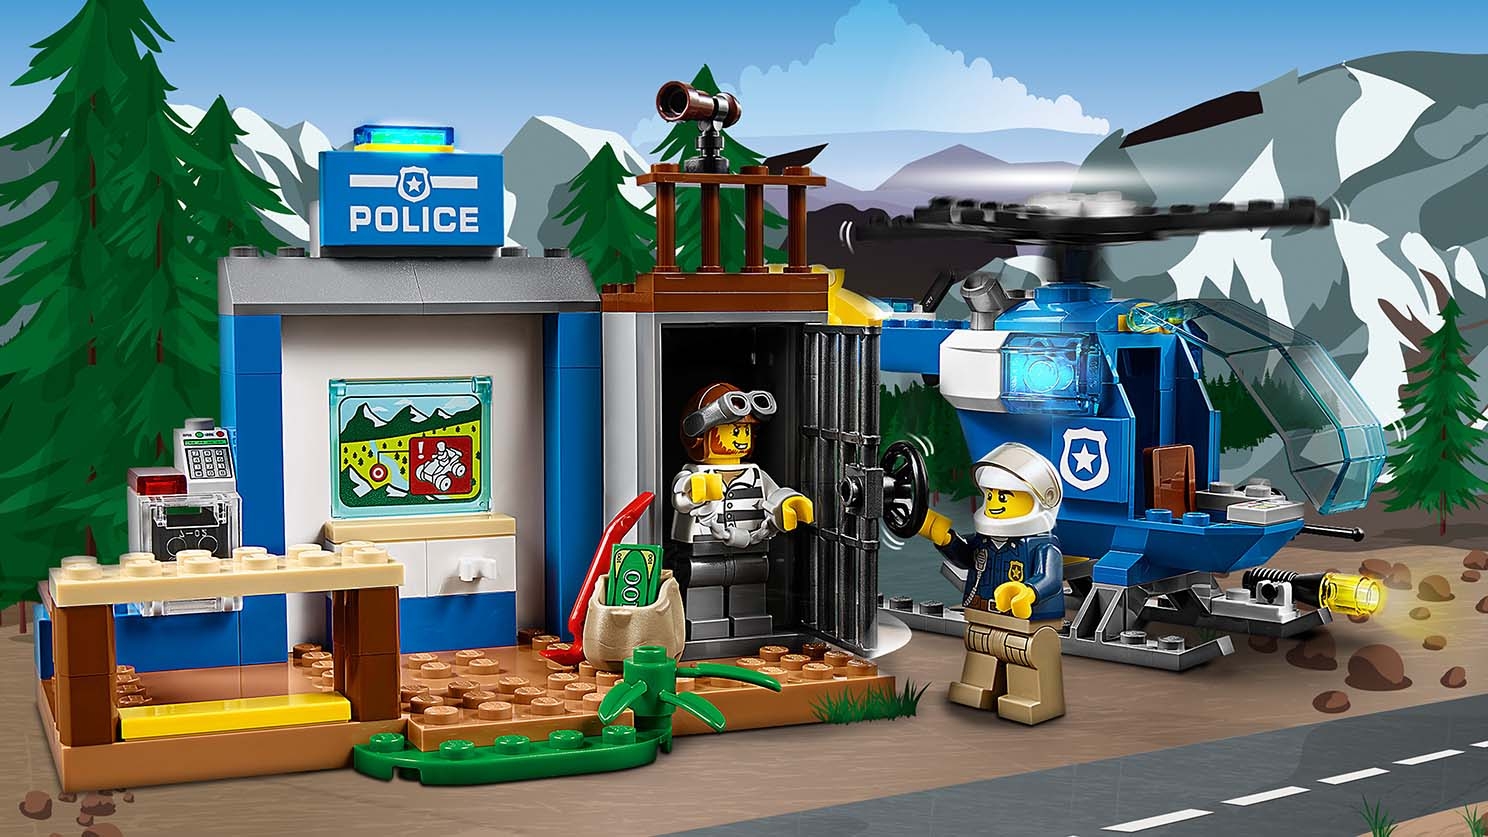 Decrement bred Risikabel Mountain Police Chase 10751 - LEGO® City Sets - LEGO.com for kids